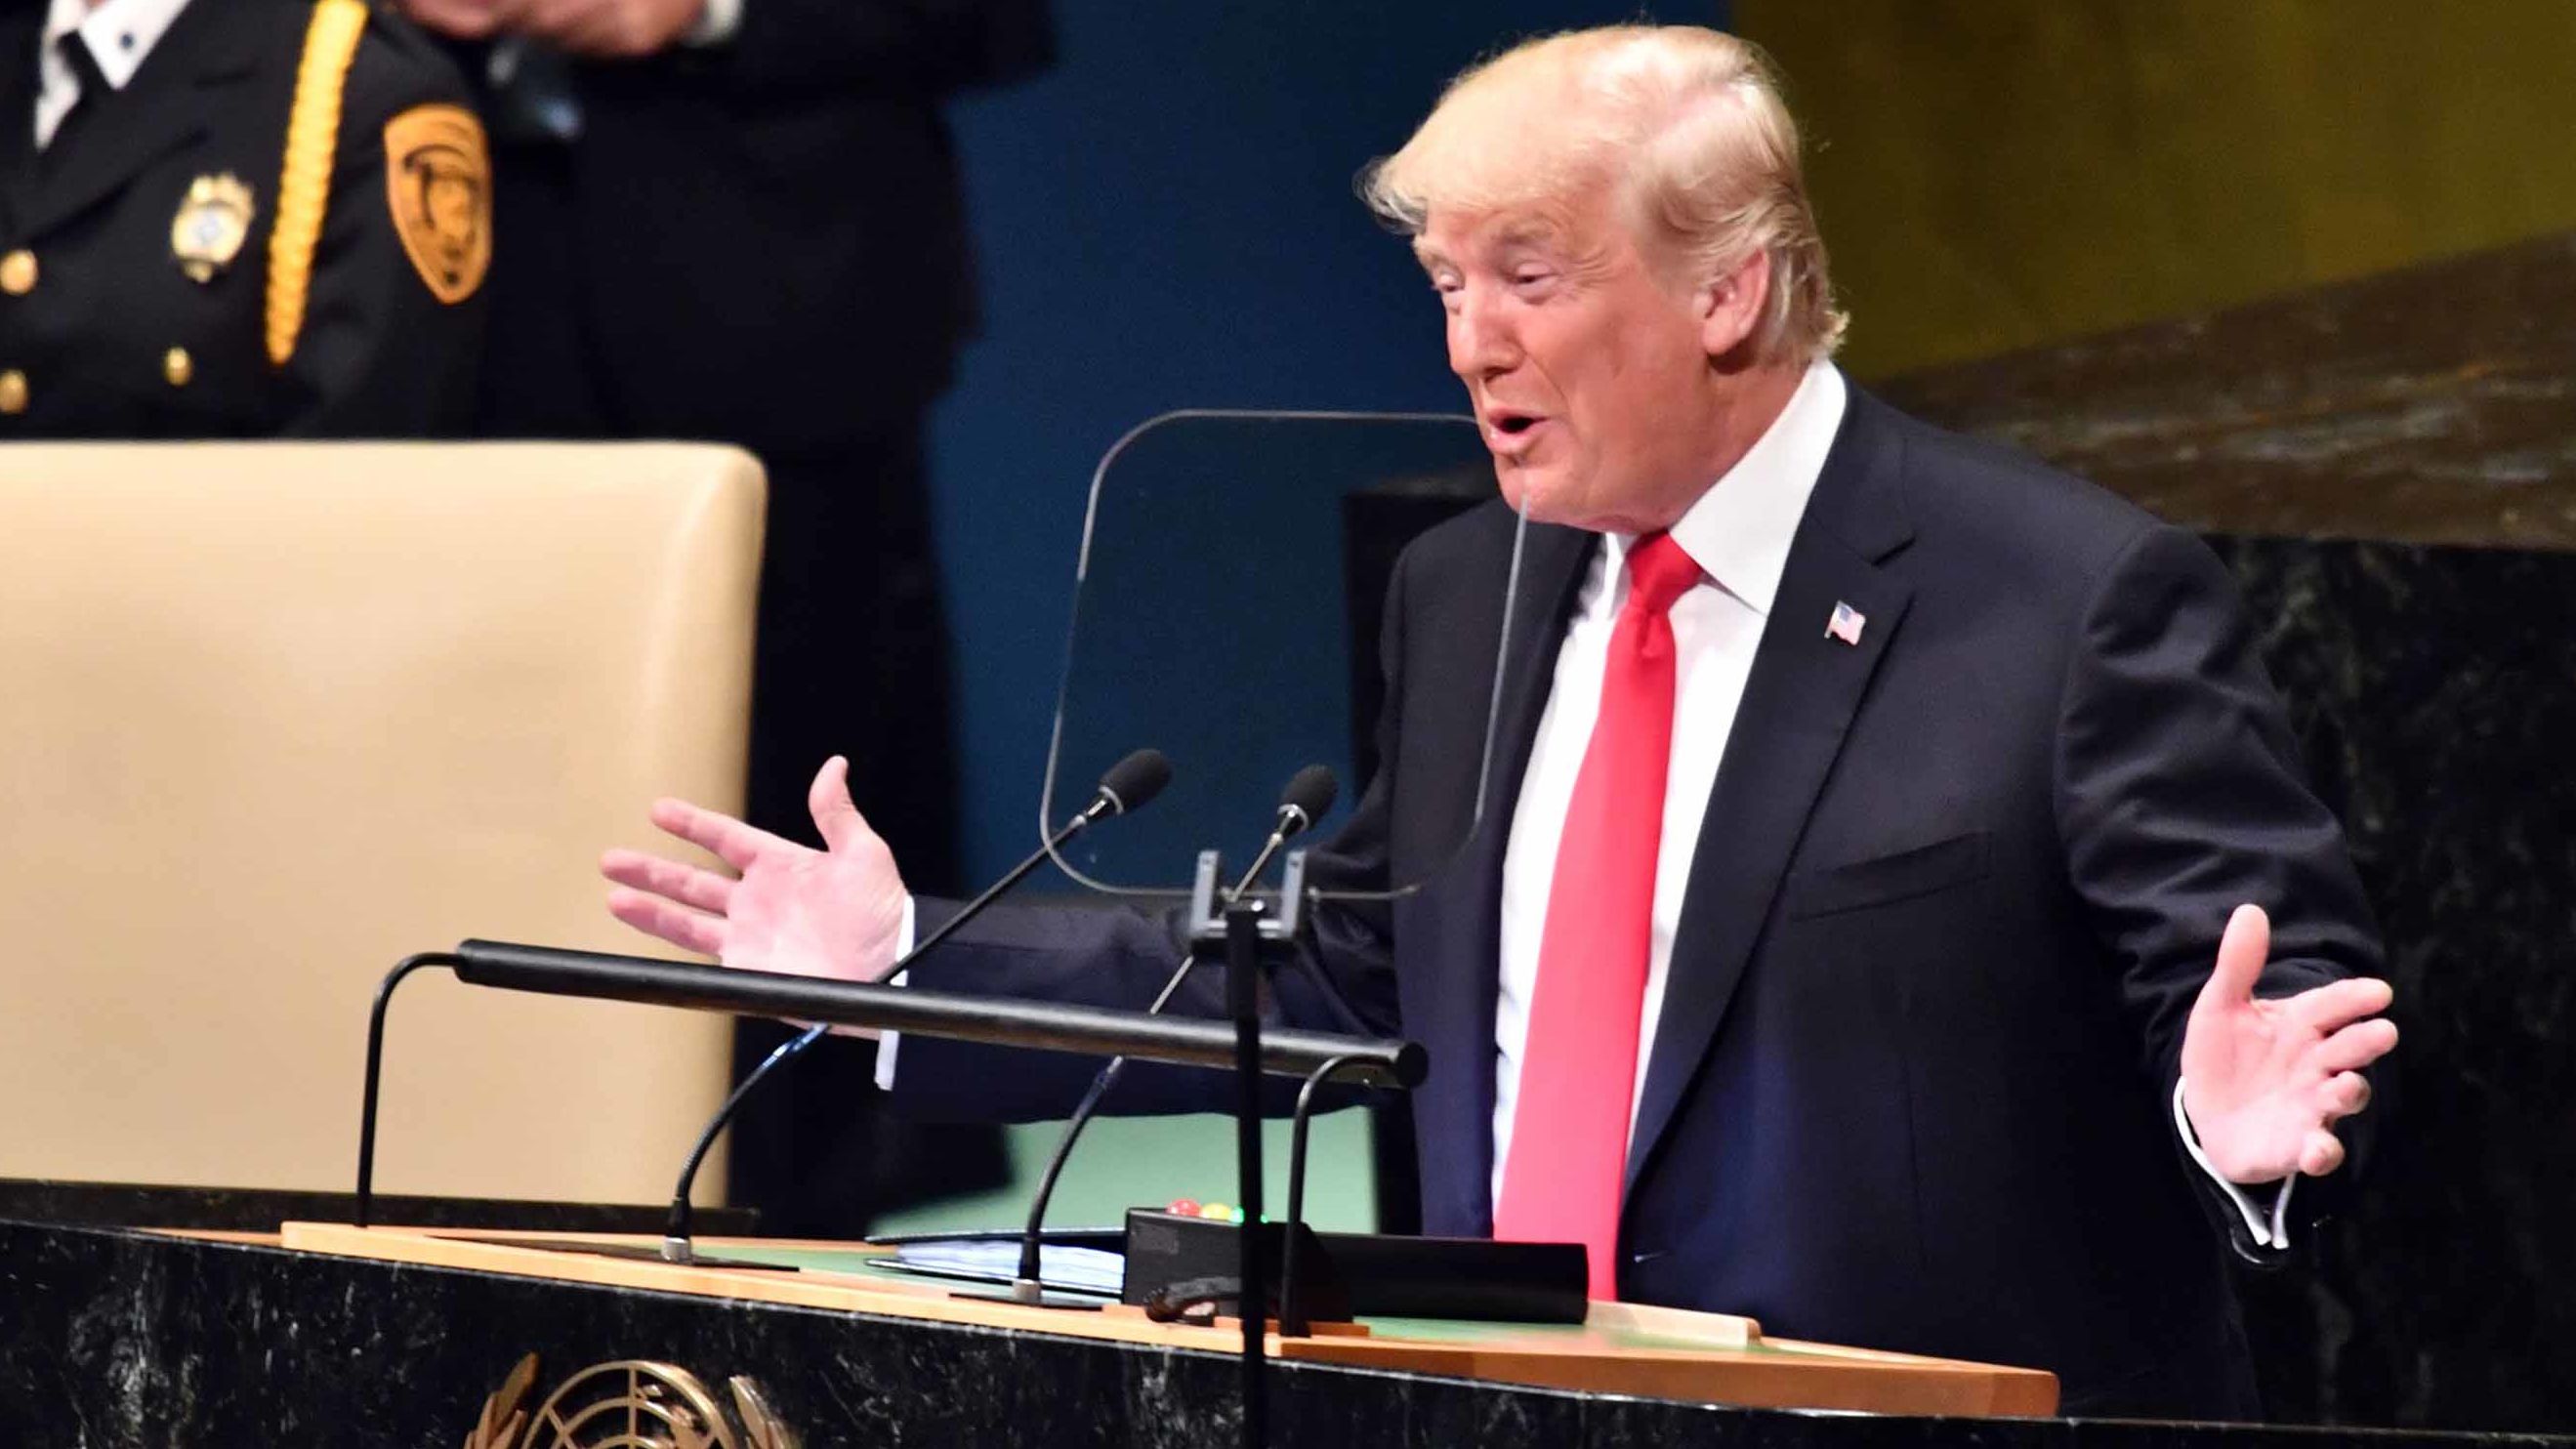 Trump opened his speech Tuesday by saying his administration "has accomplished more than almost any administration in the history of our country." <a href="https://www.cnn.com/politics/live-news/trump-un-2018/h_894de58b3d36fc936ab5b8798ba8d87f" target="_blank">When that drew some chuckles,</a> Trump said, "I didn't expect that reaction, but that's OK." Then there was louder laughter and some applause.